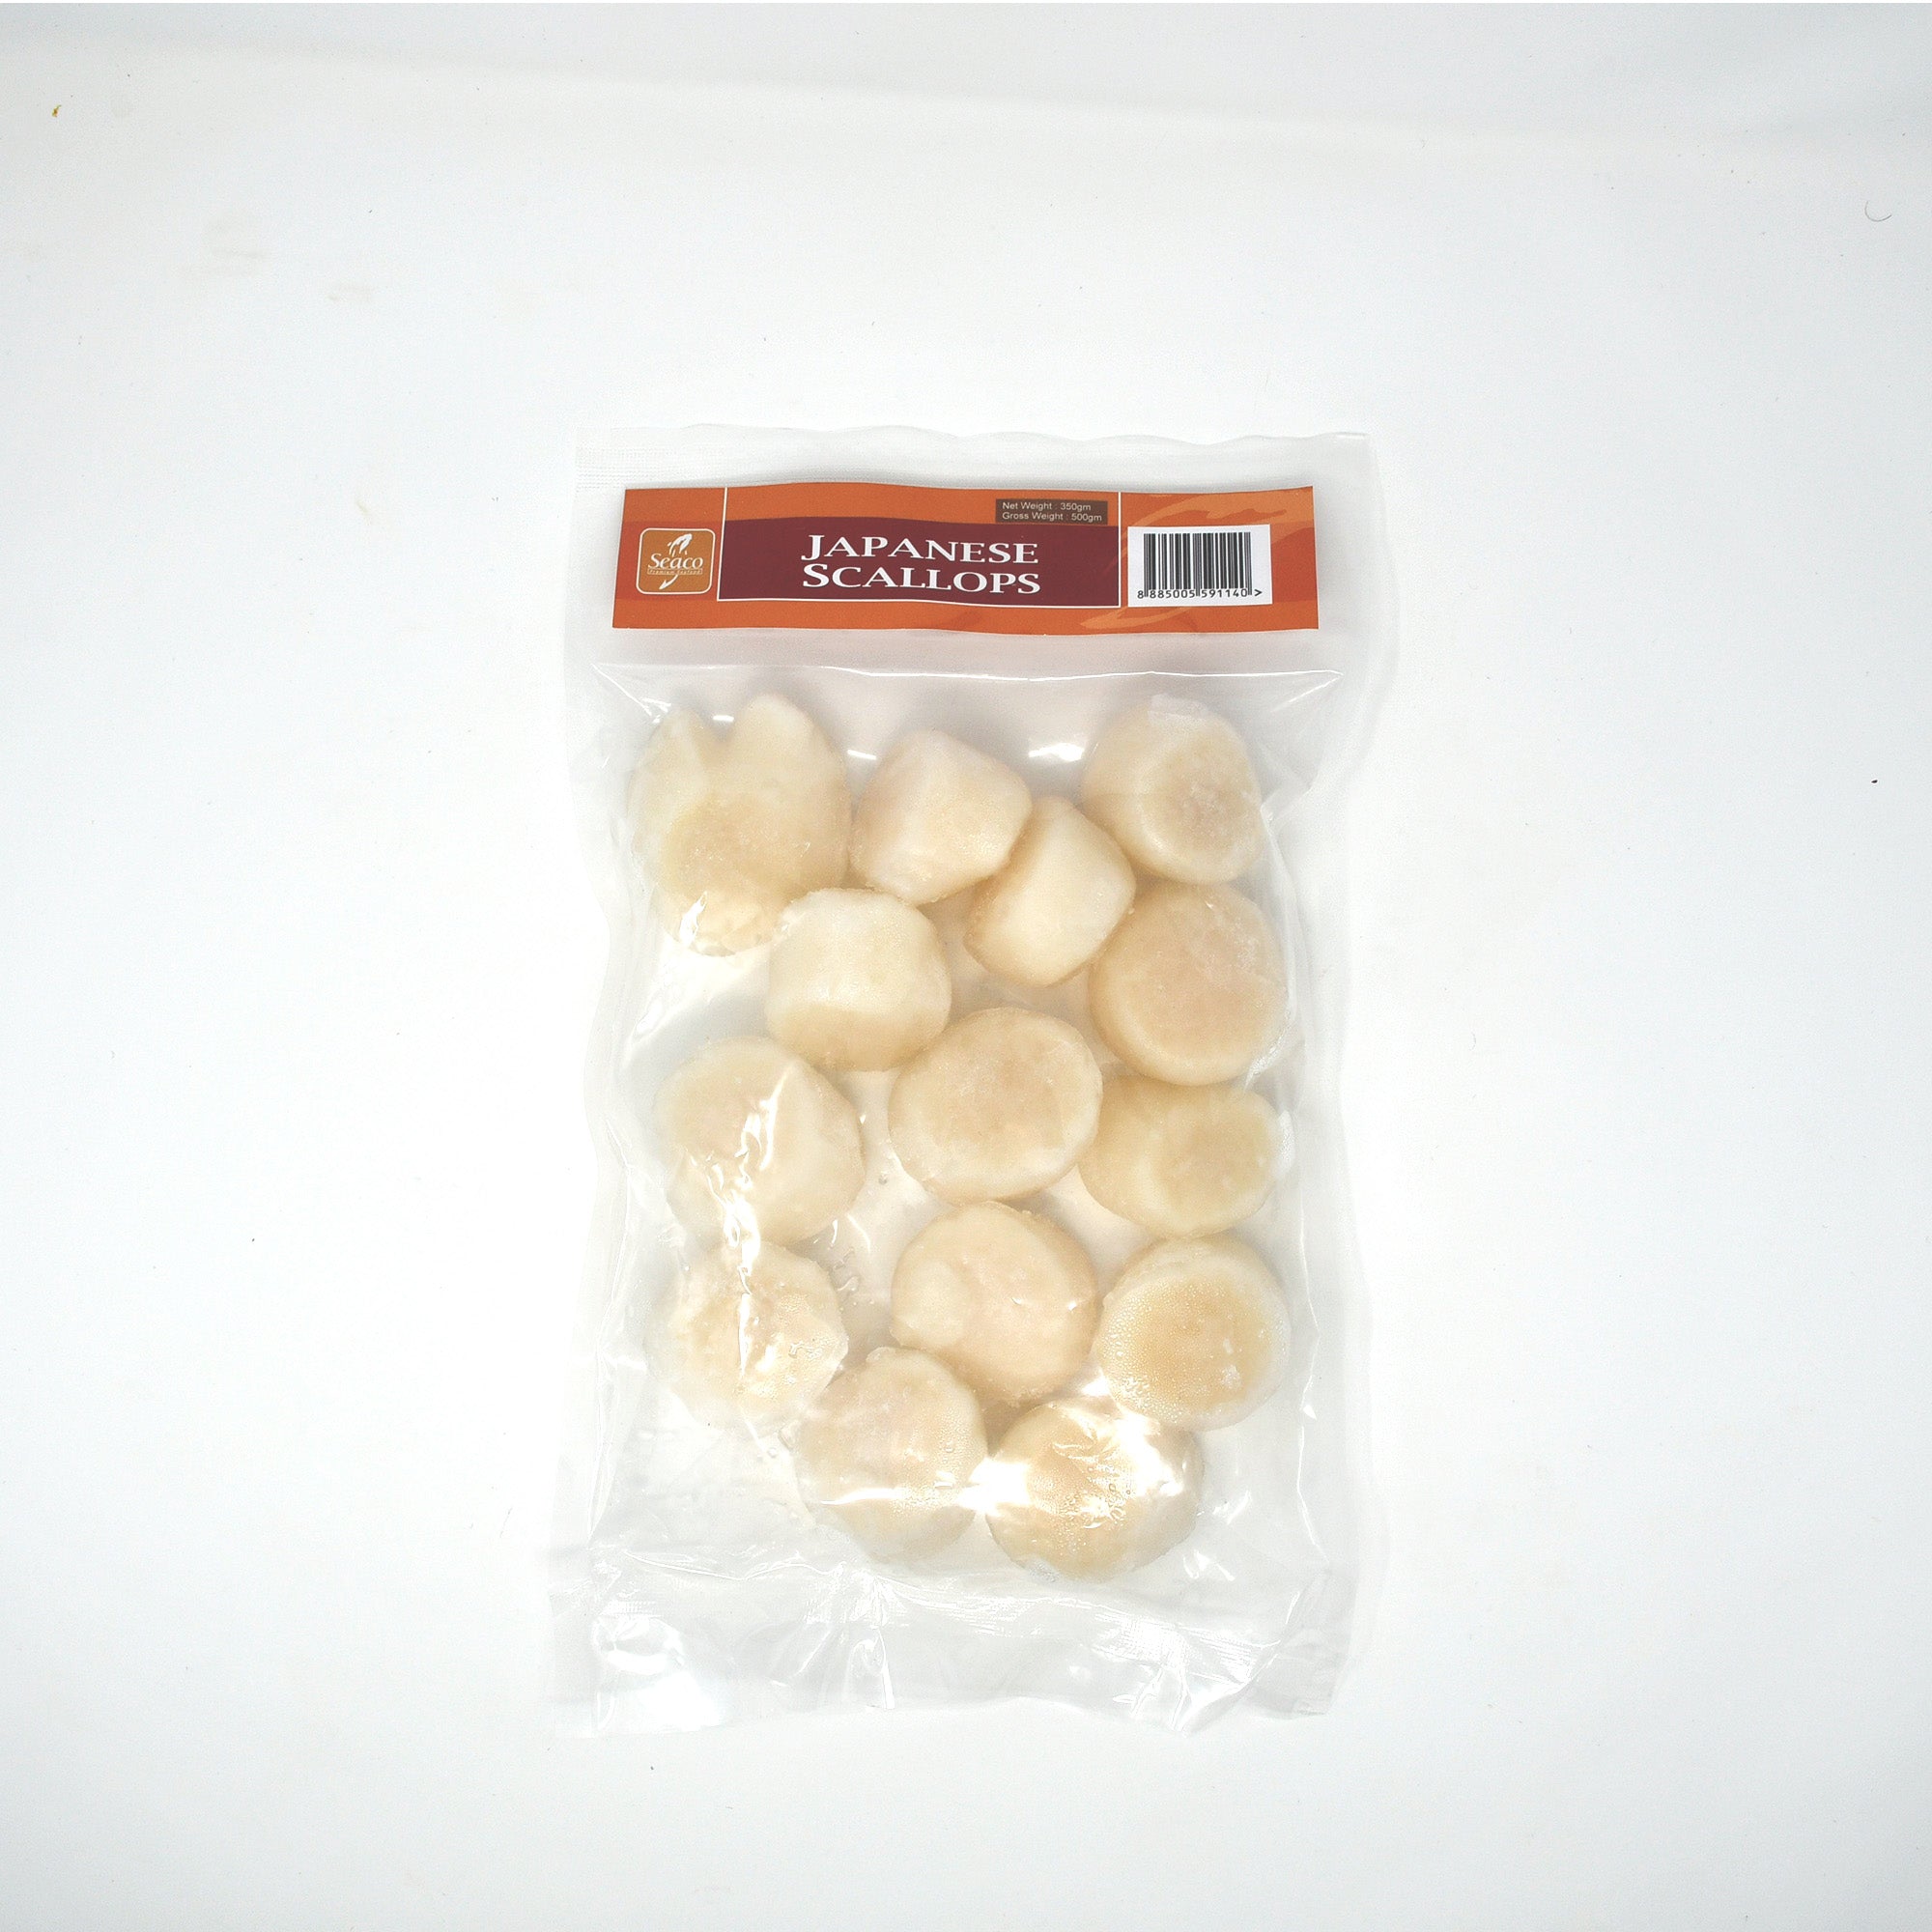 JAPANESE SCALLOPS MEAT (500g)